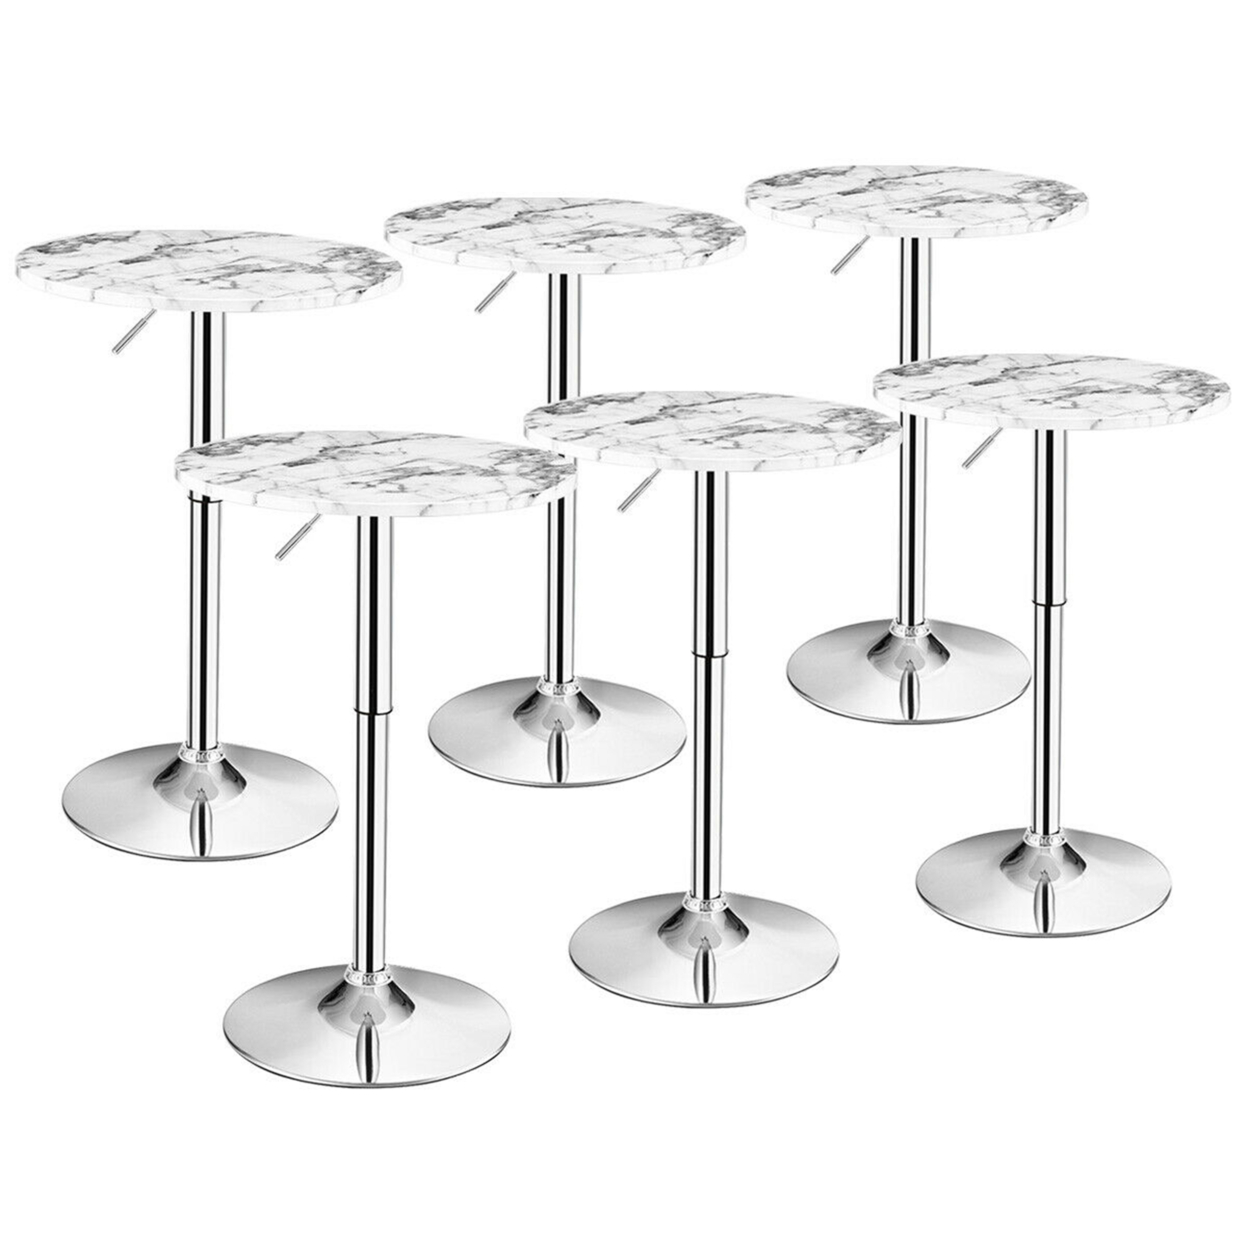 6PCS Round Pub Table Swivel Adjustable Bar Table W/Faux Marble Top White